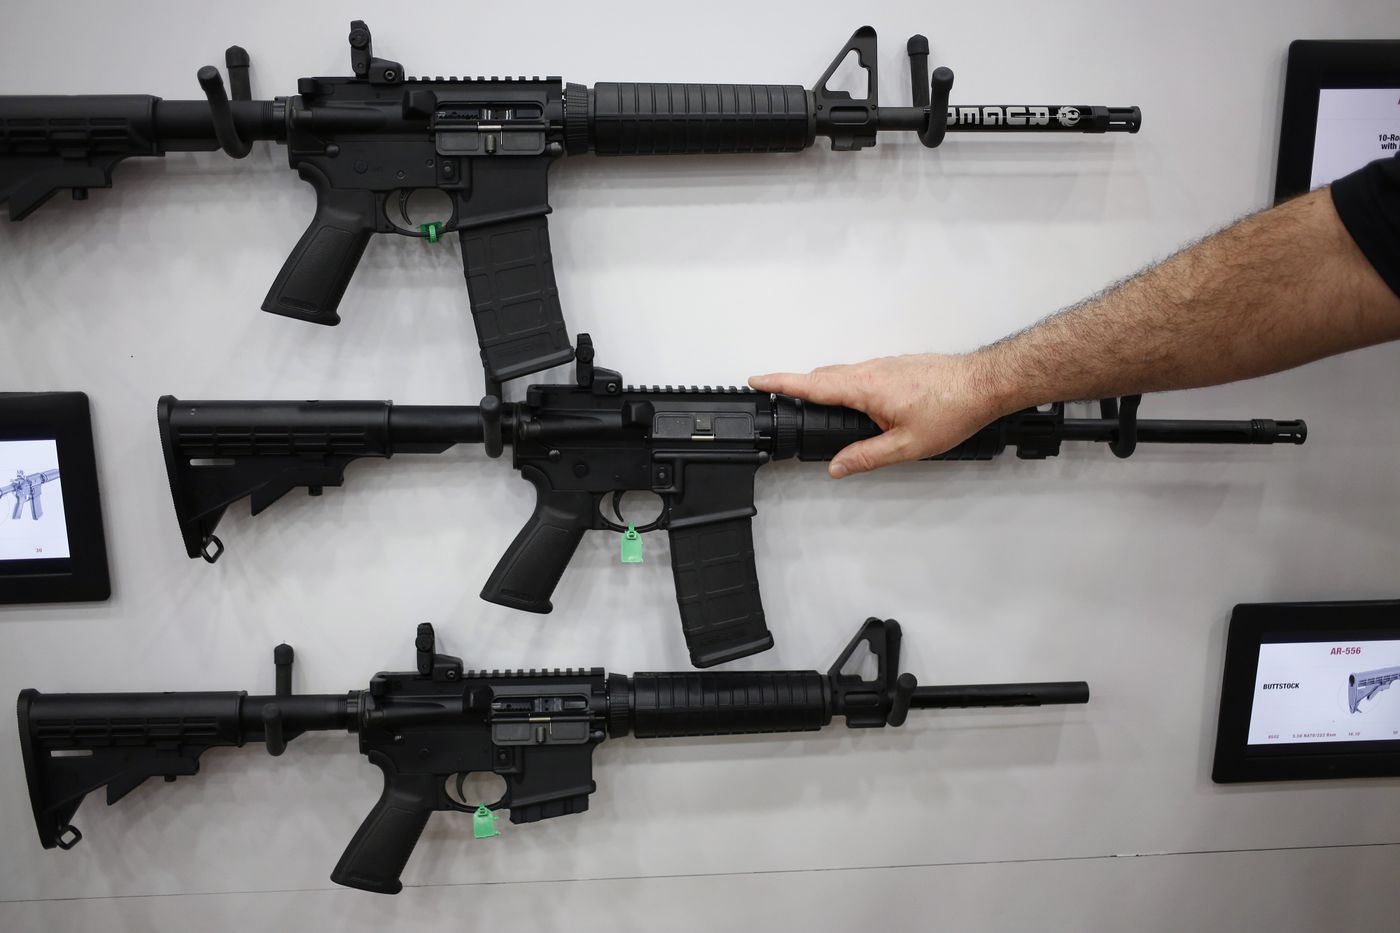 New York to Ban Body Armor, Raise Age Limit to Purchase Semiautomatic Rifles